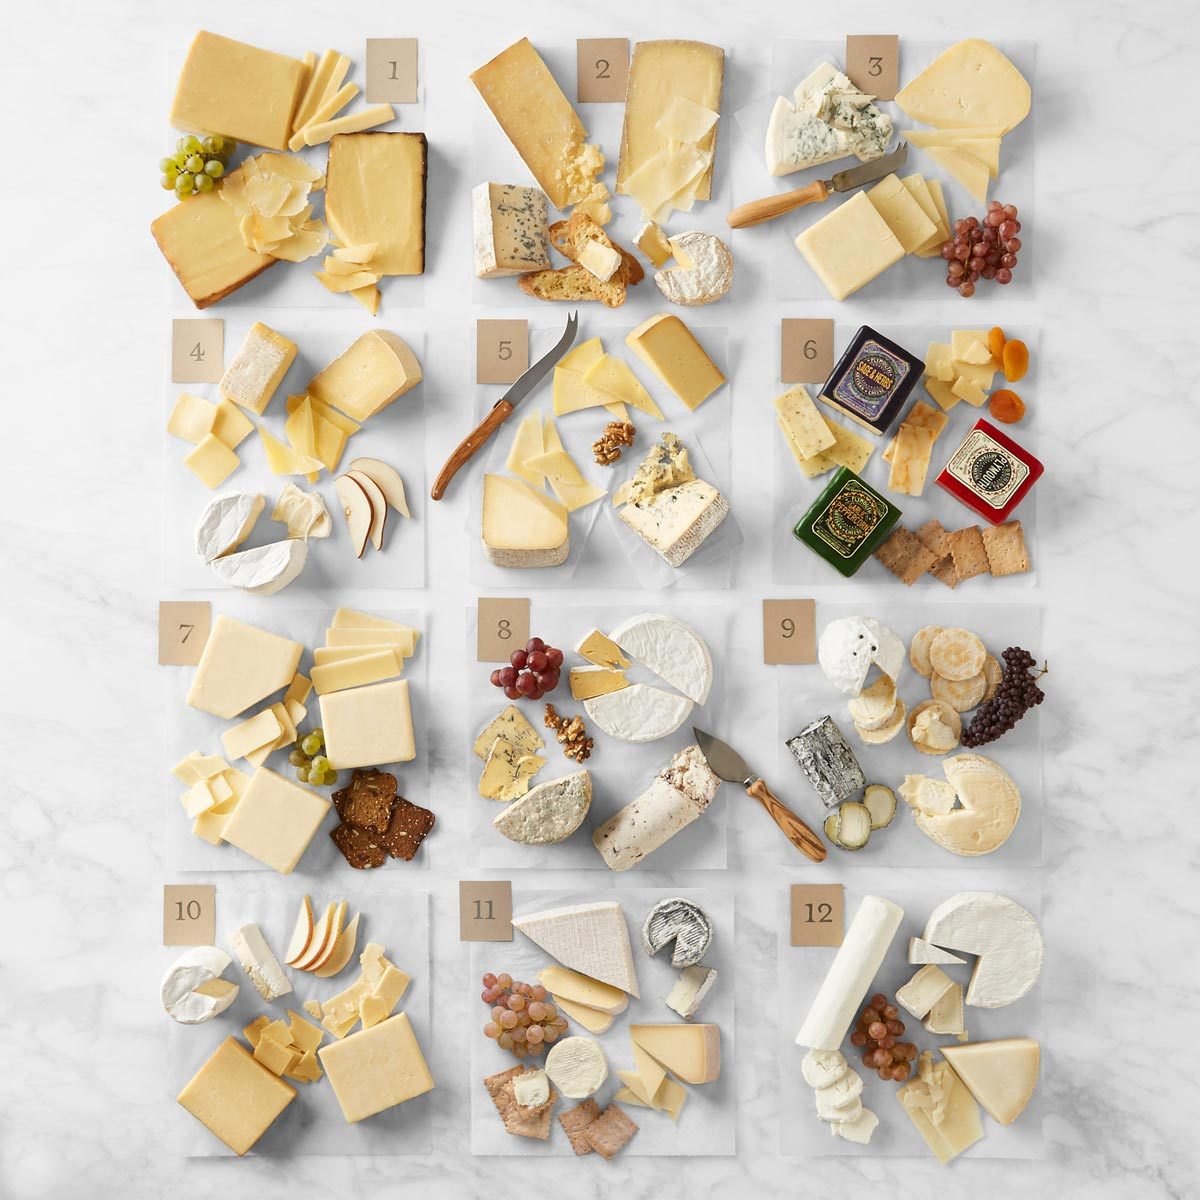 Williams Sonoma 12 Months Of Us Cheese Subscription